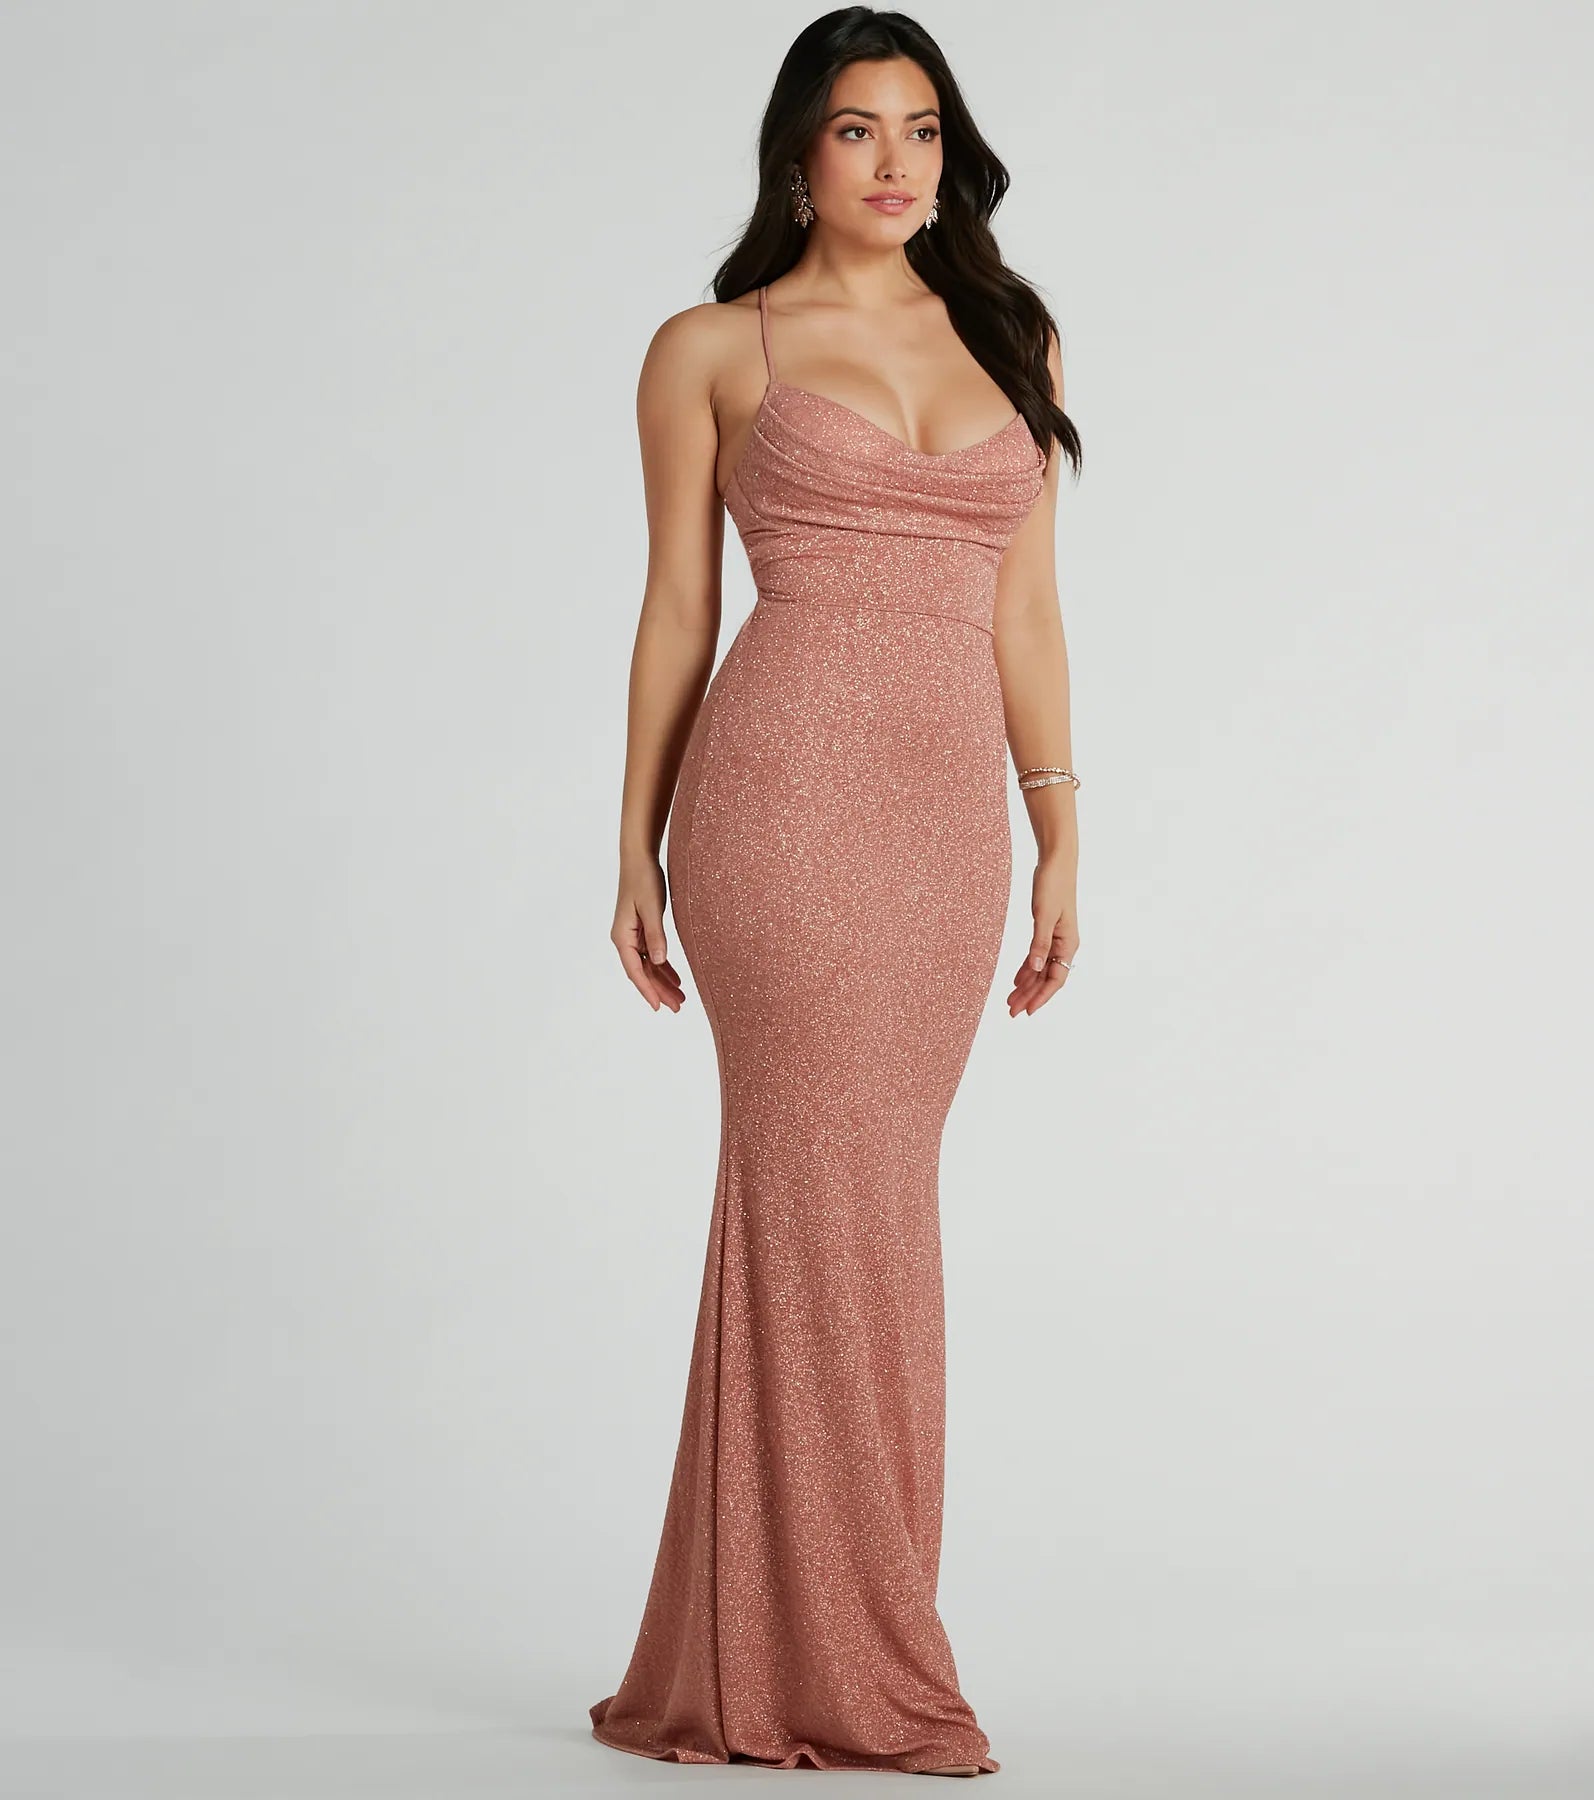 Sophisticated Spaghetti Strap Lace-Up Glittering Stretchy Mermaid Knit Floor Length Cowl Neck Prom Dress/Party Dress